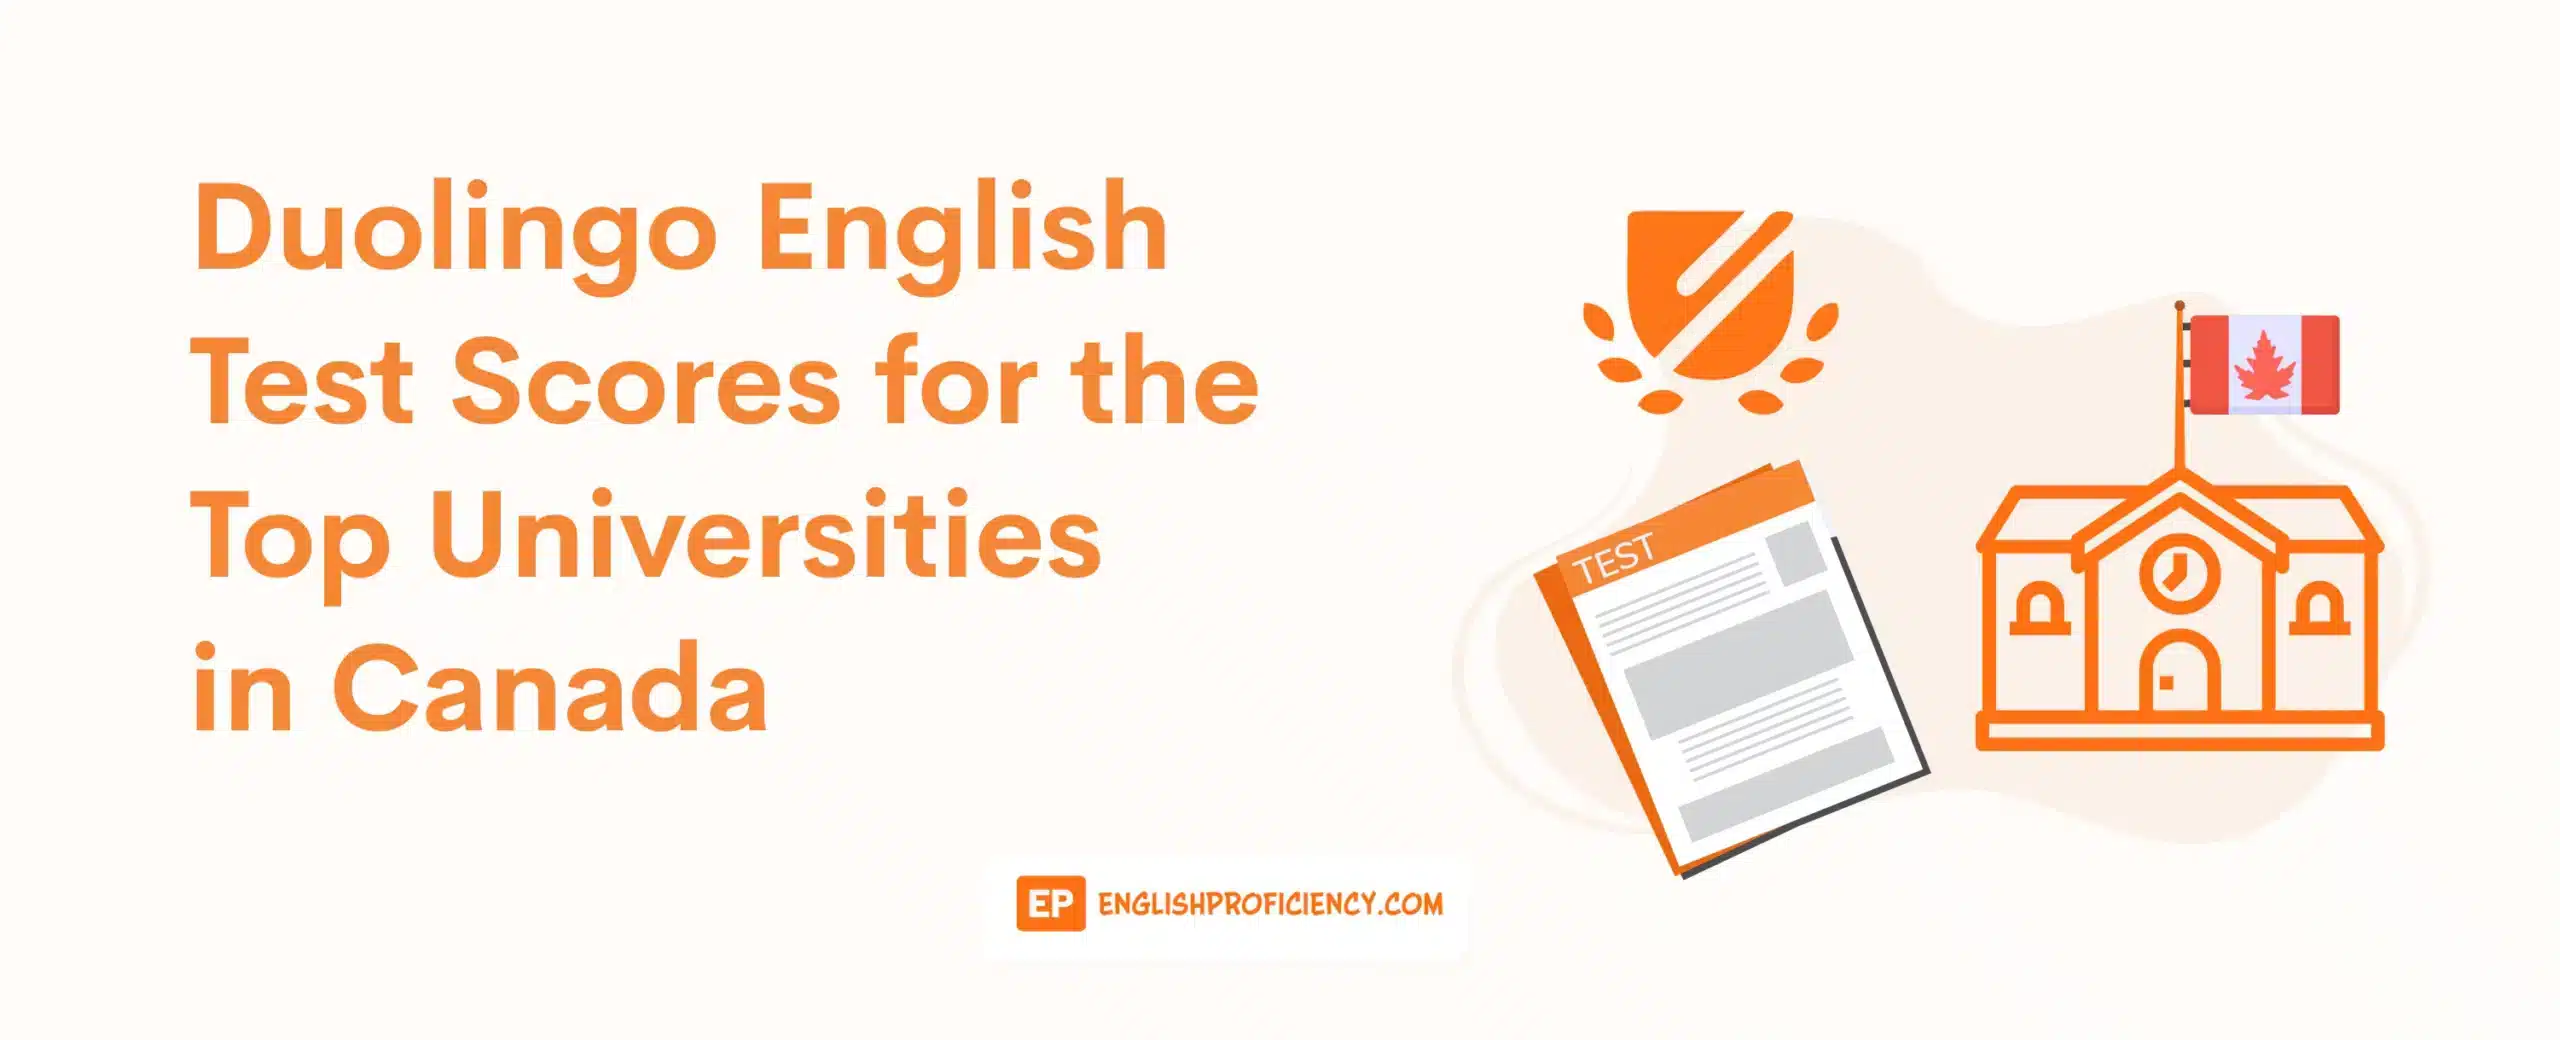 Duolingo English Test Scores for the Top Universities in Canada